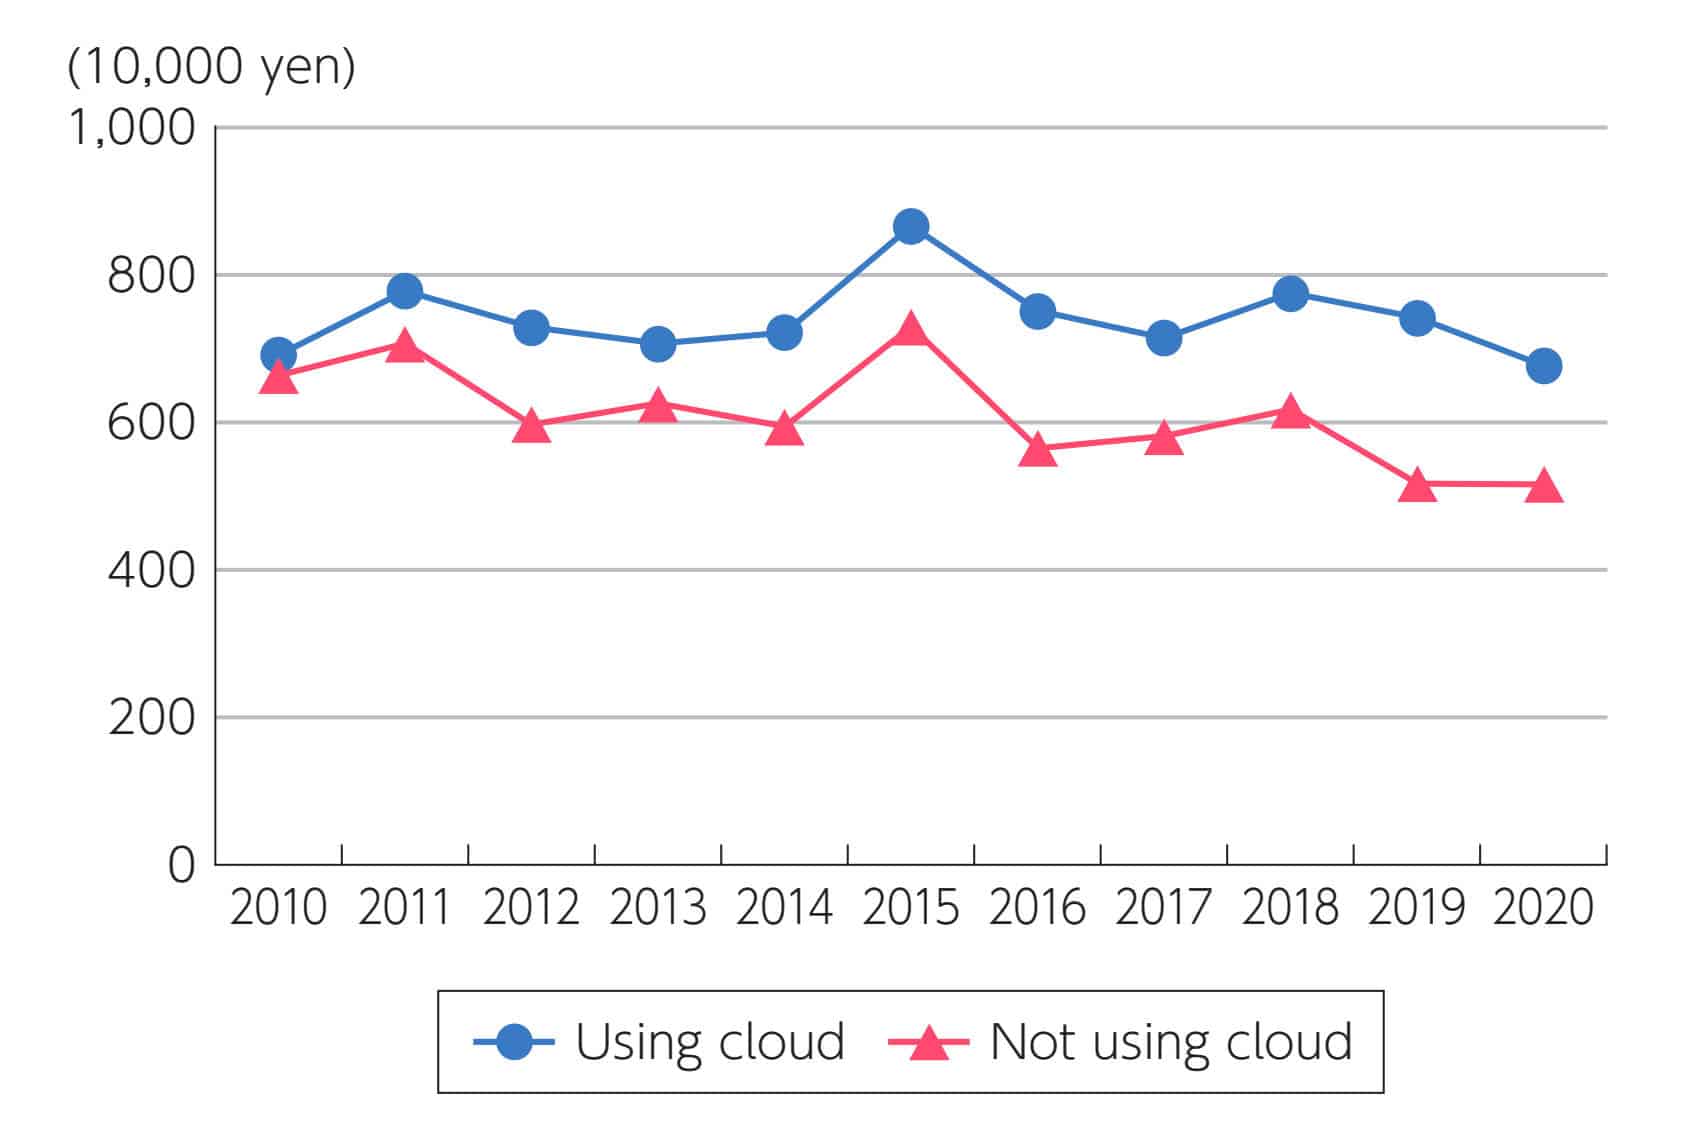 Use of Cloud Services and Labor Productivity